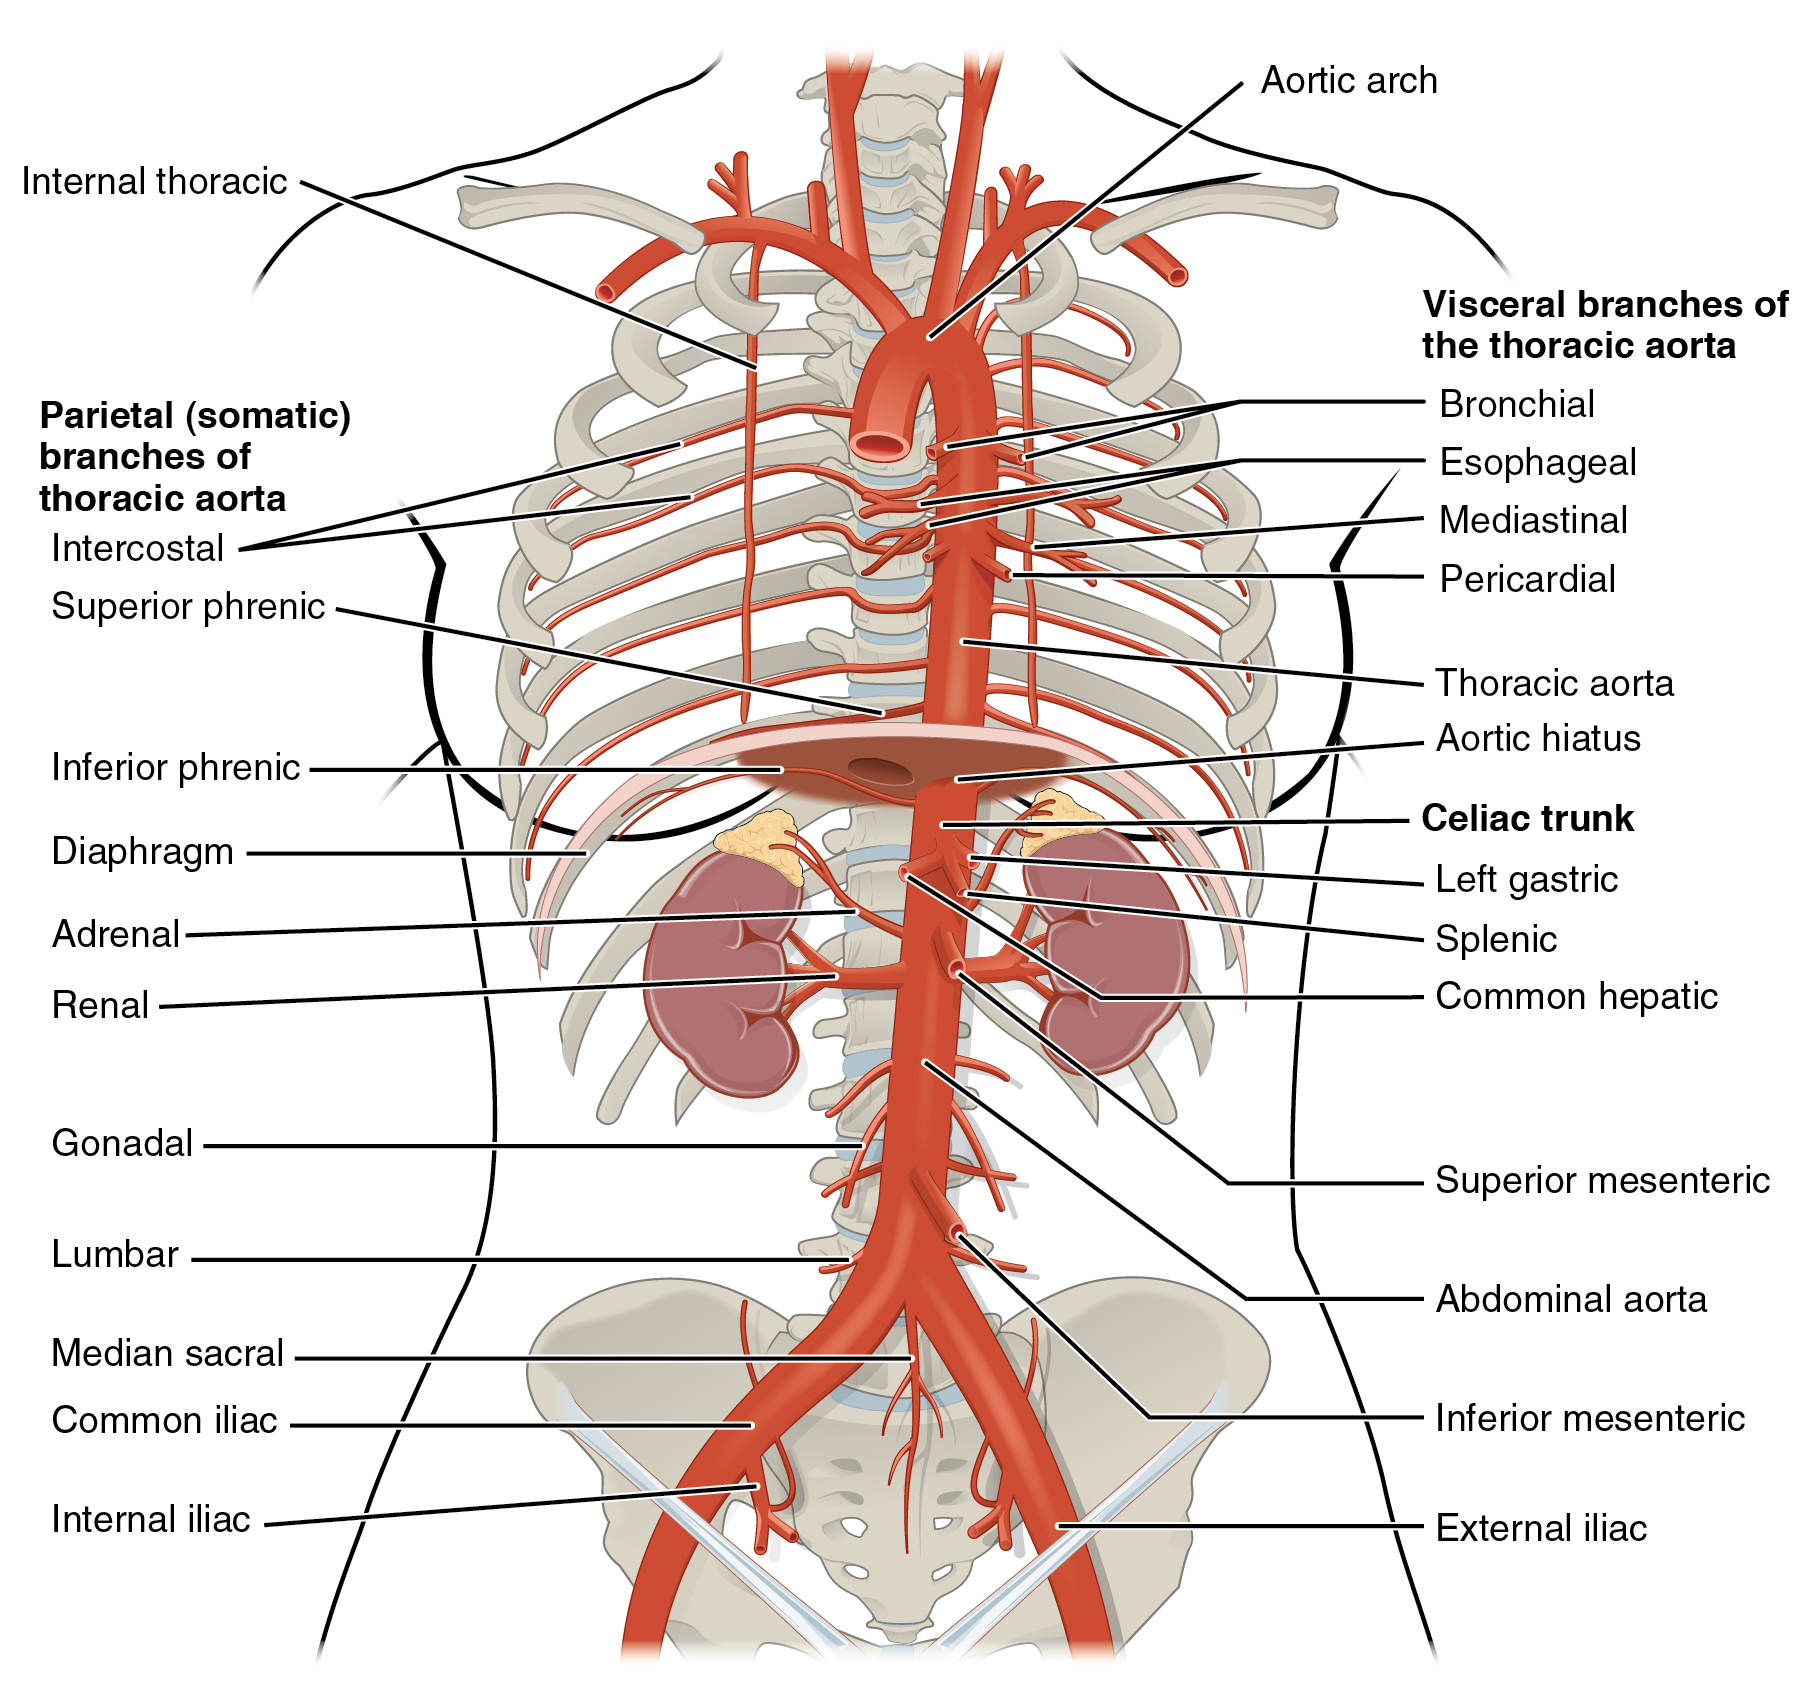 Arteries of the Thoracic and Abdominal Regions